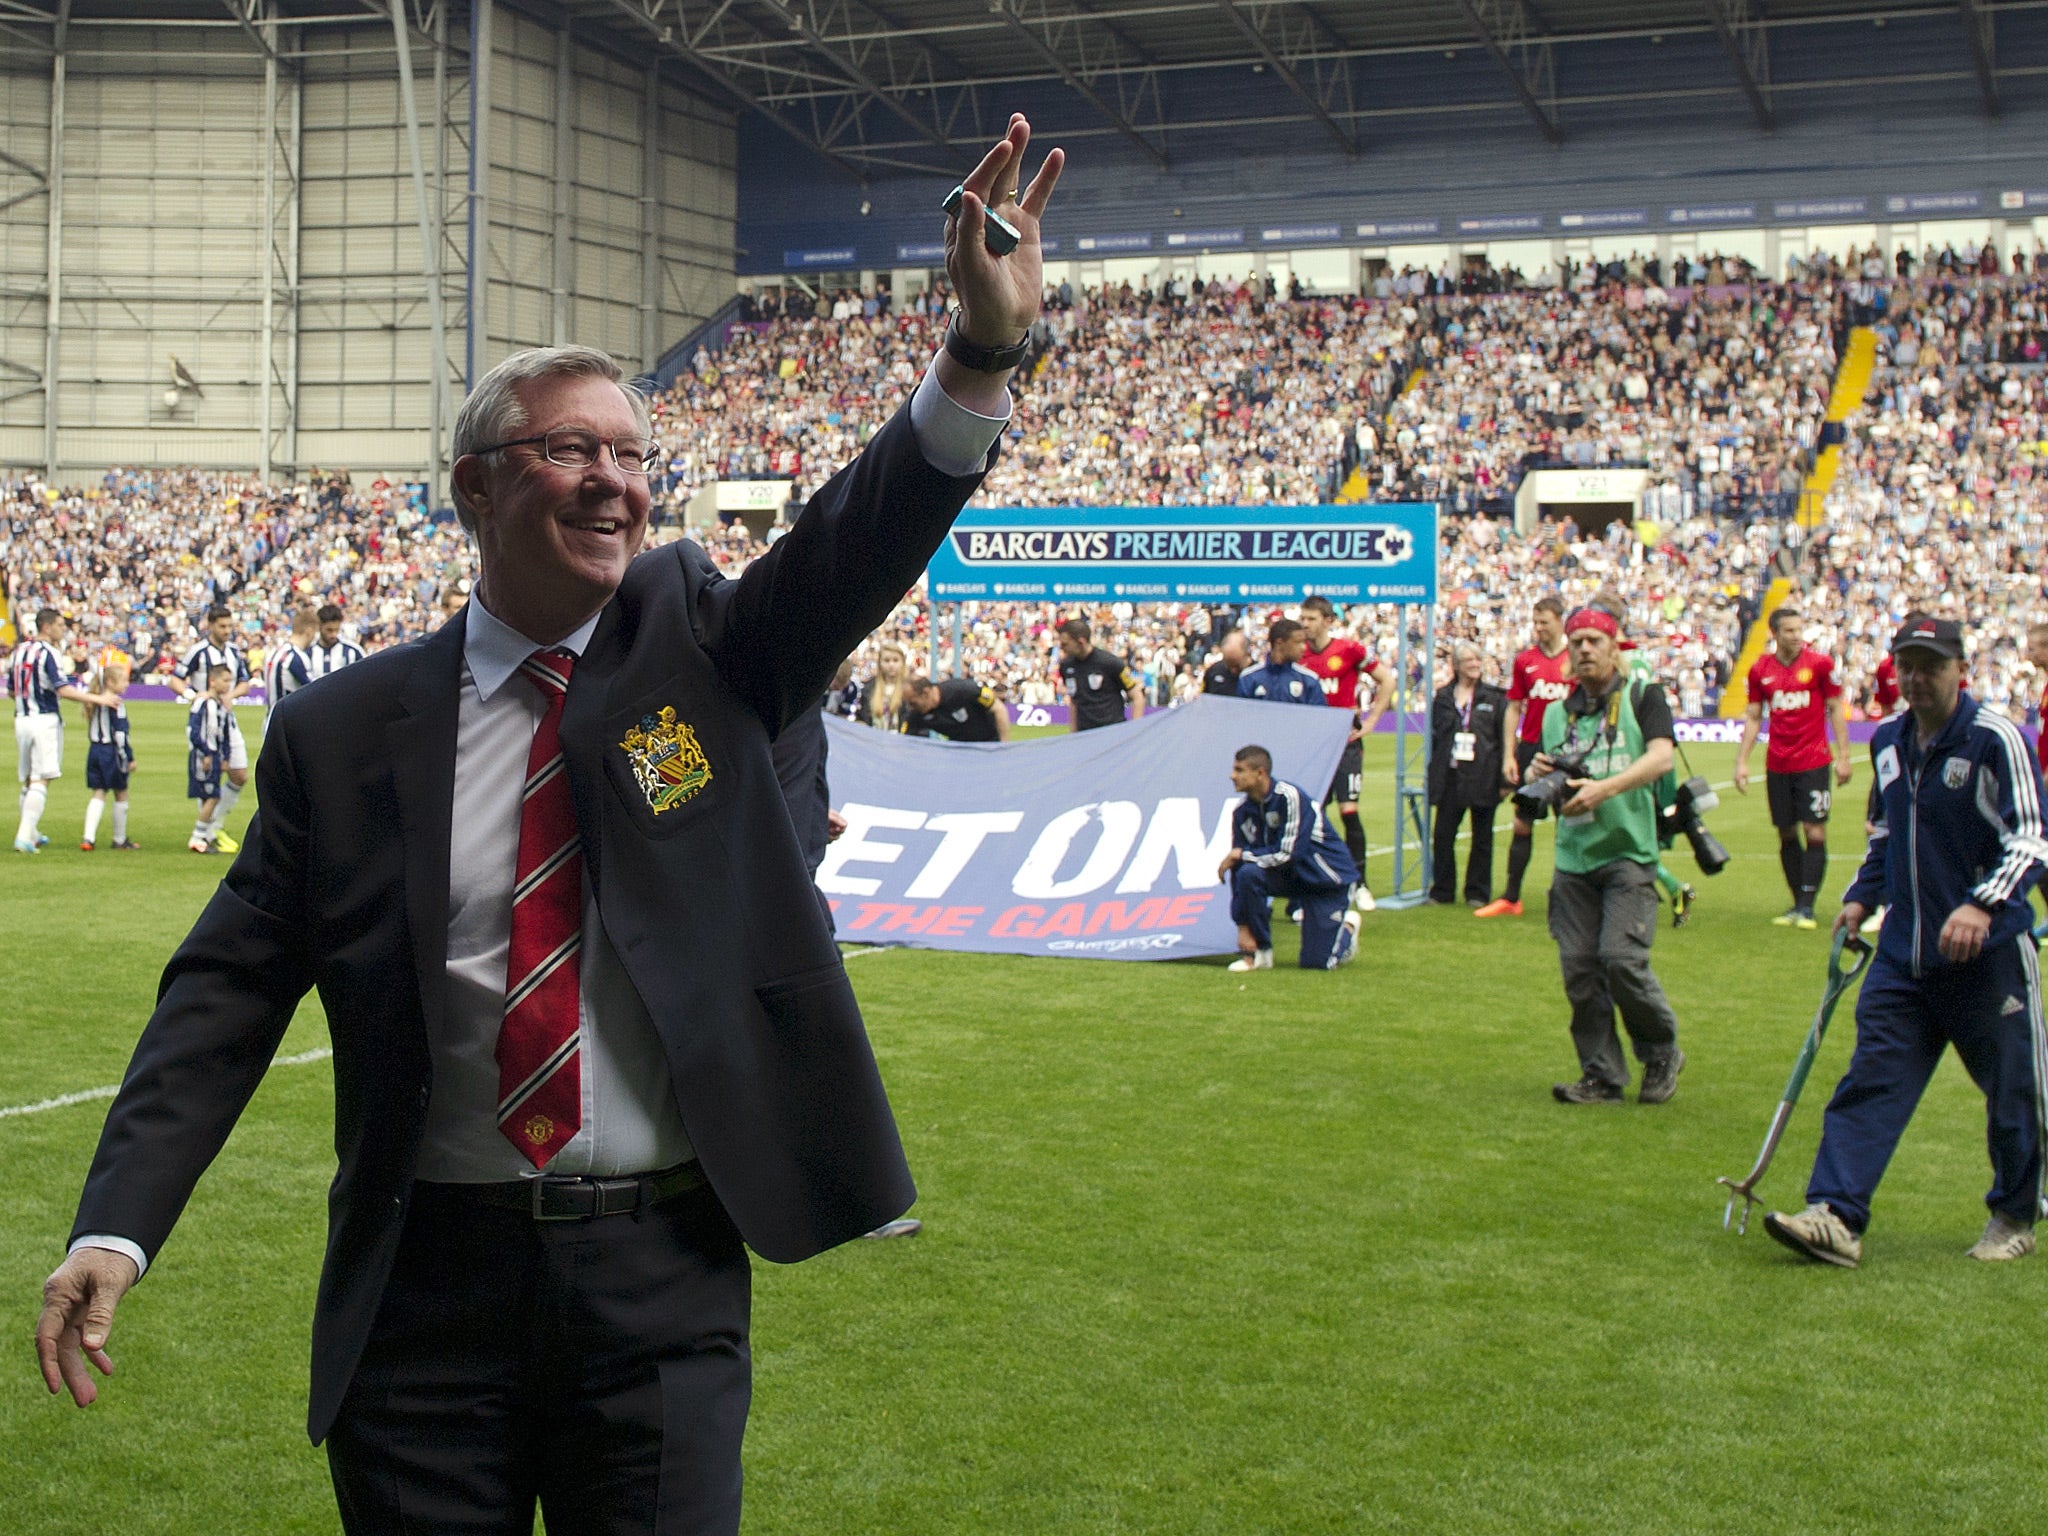 Sir Alex Ferguson bids farewell in his final game in charge of Manchester United